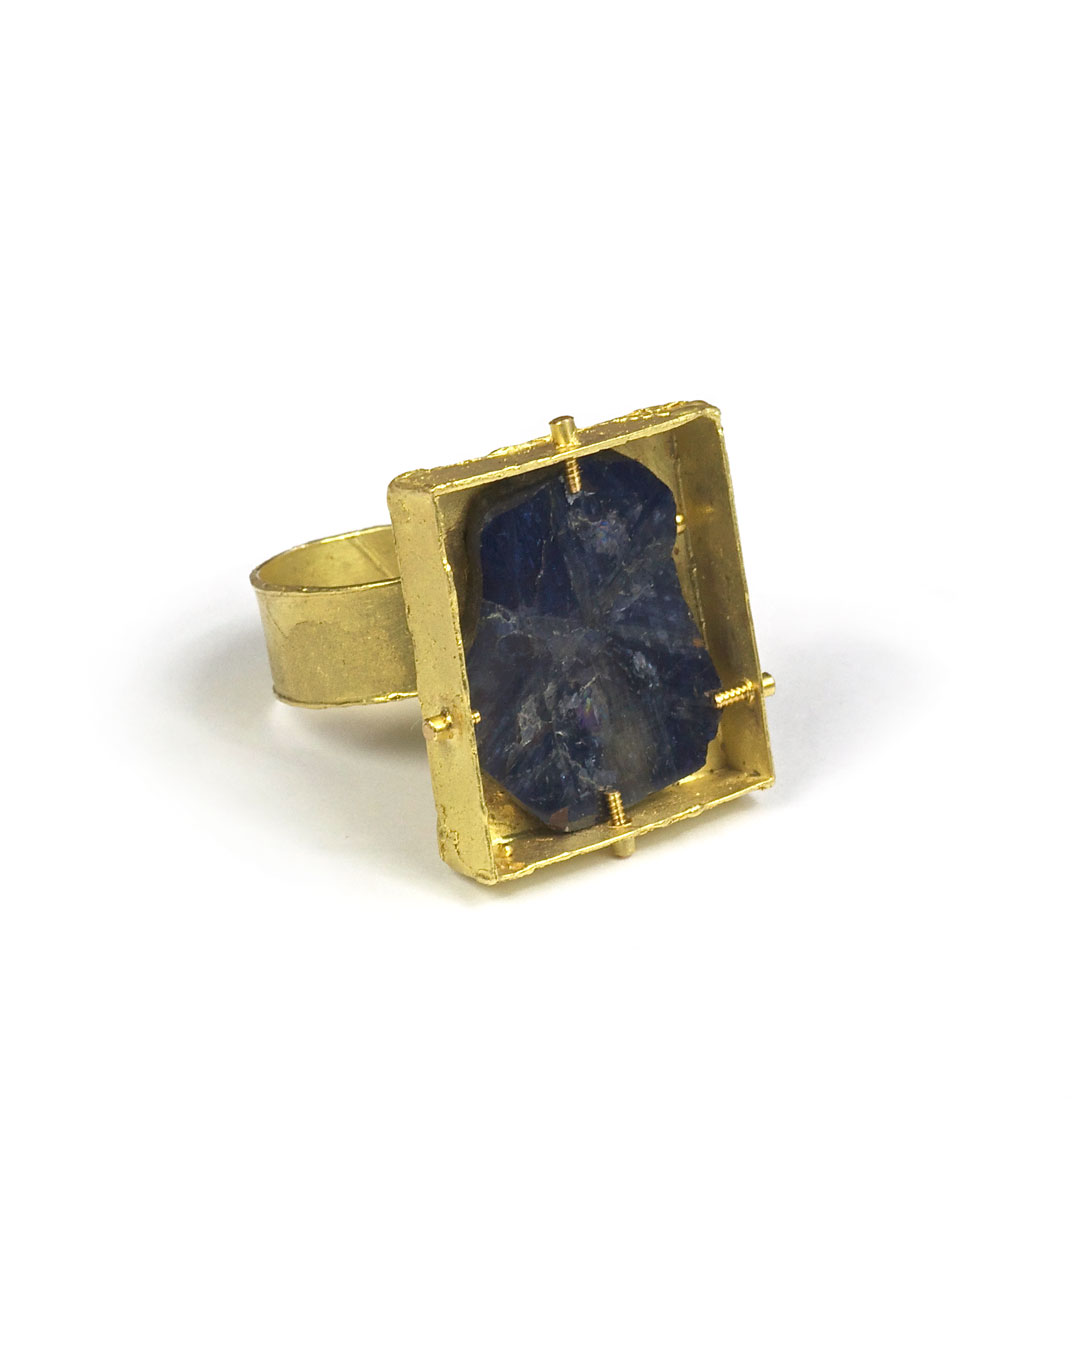 Andrea Wippermann, untitled, 2004, ring; 18ct gold, sapphire, 35 x 23 x 25 mm, €2550